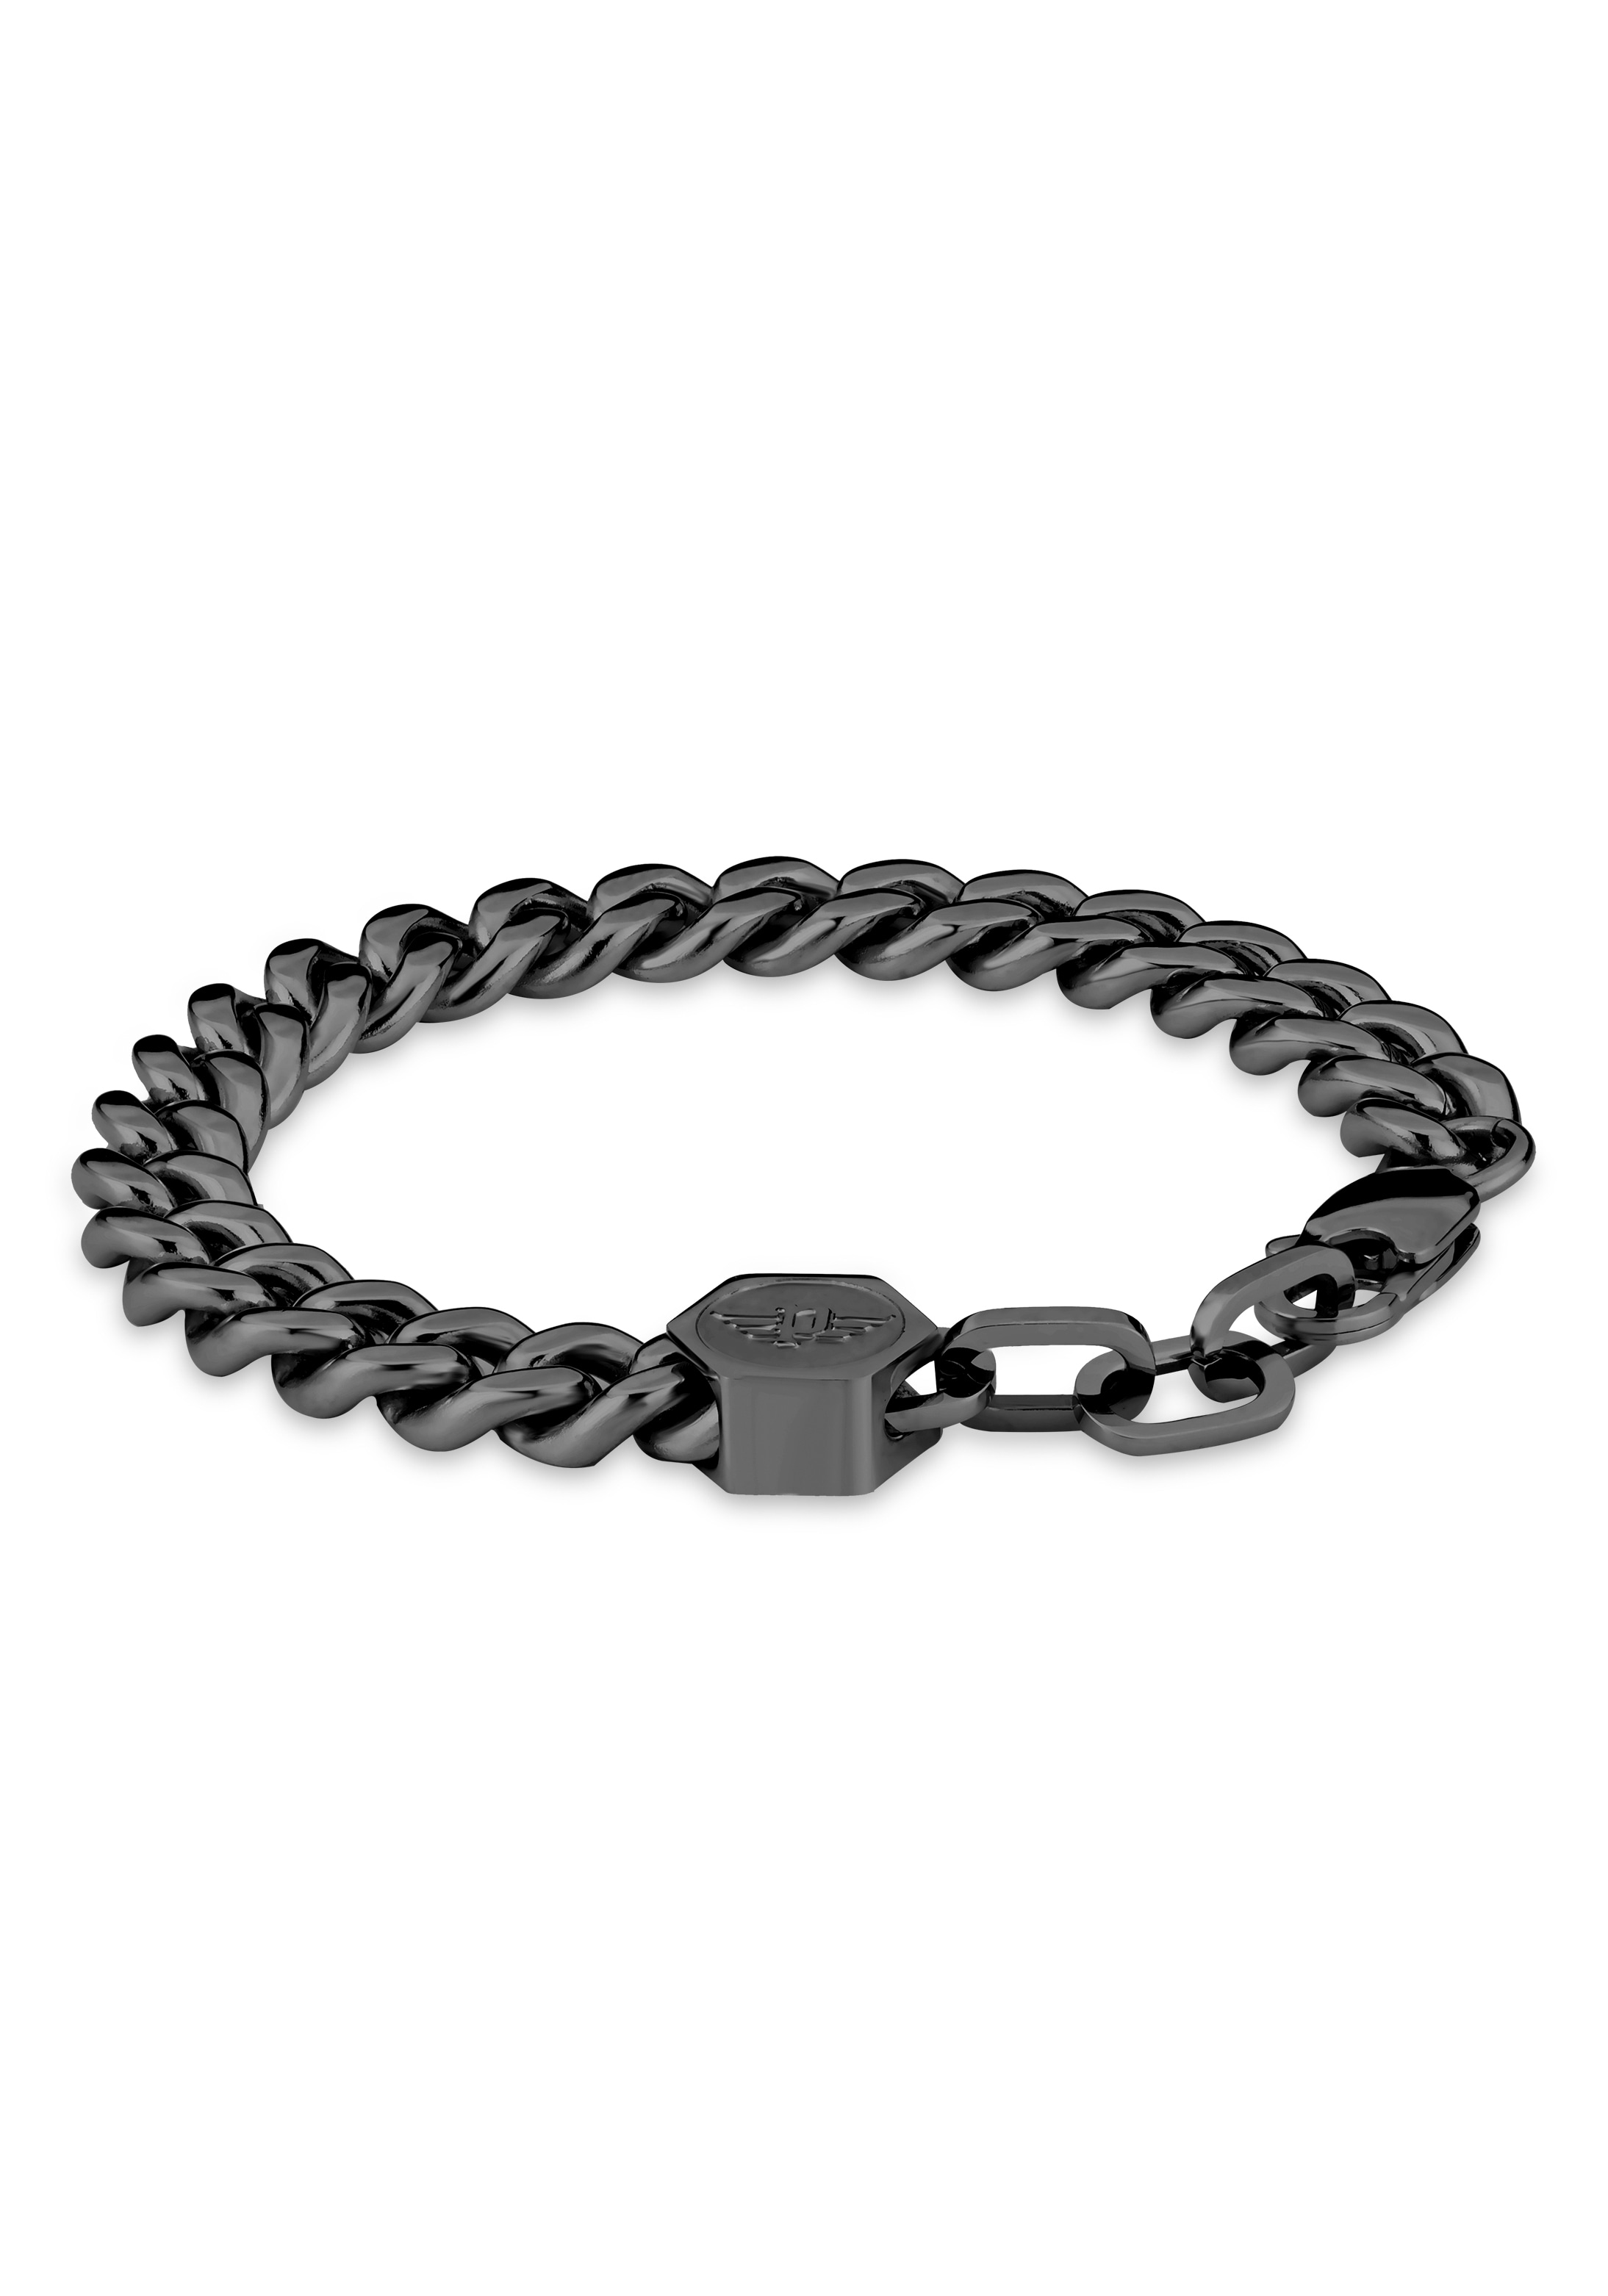 Police »HINGED, PEAGB2211602, online PEAGB2211604« bei Armband